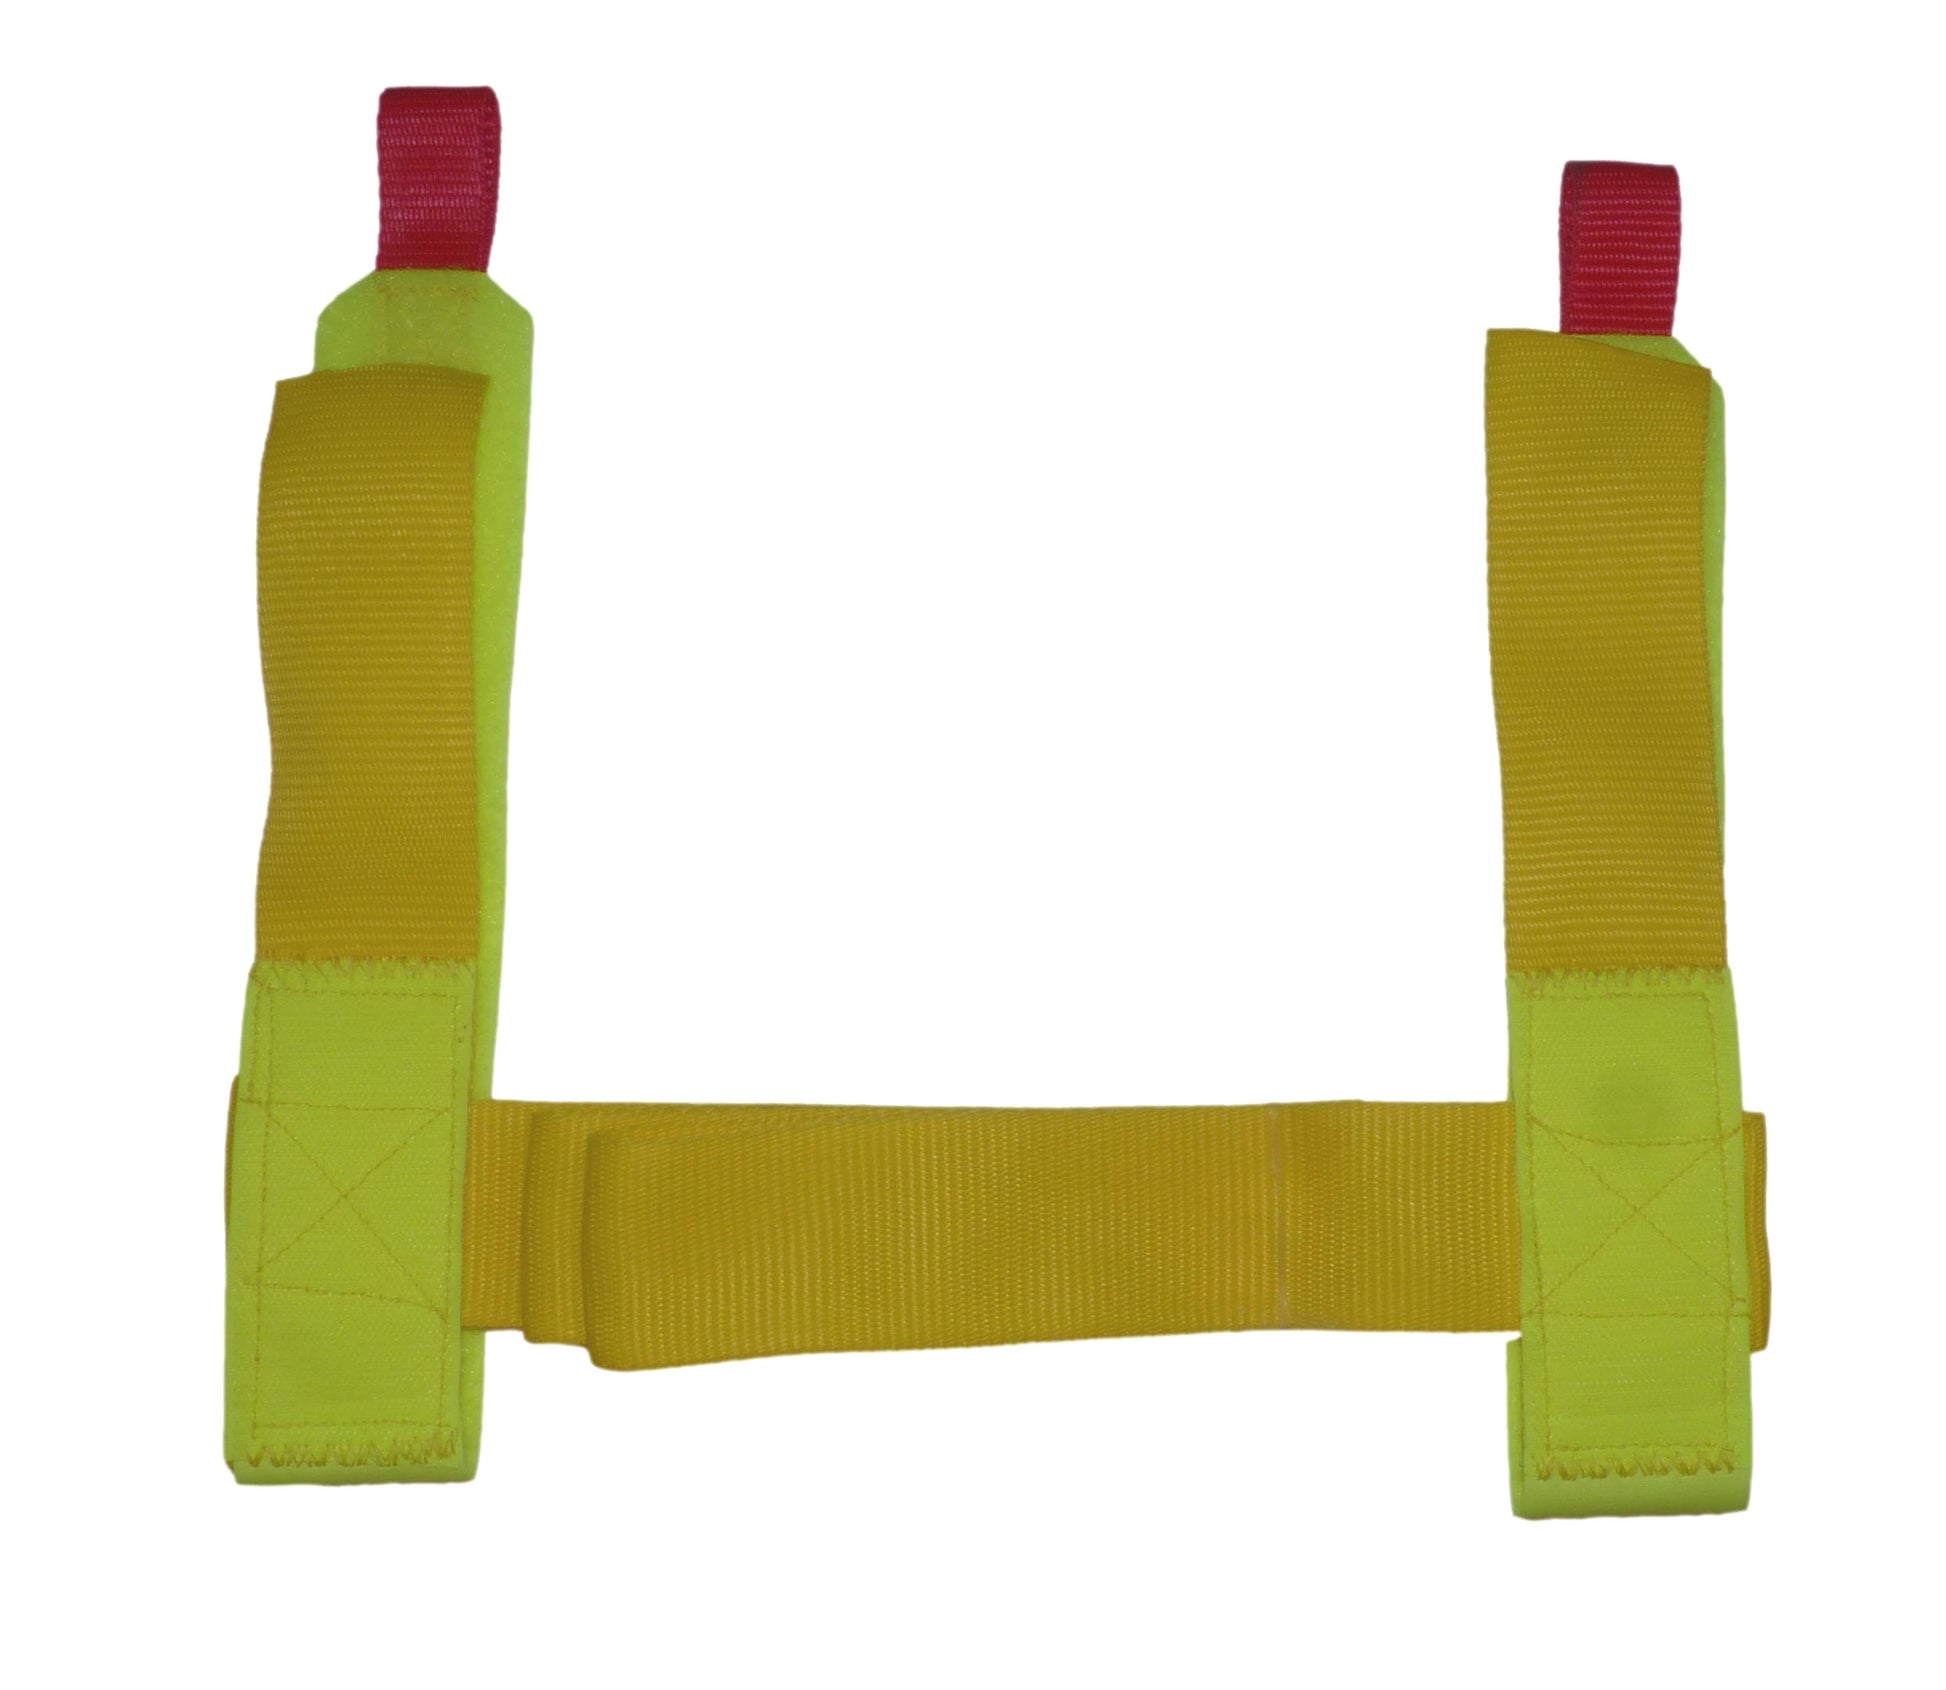 Benristraps Ski and Pole Carry Strap in yellow